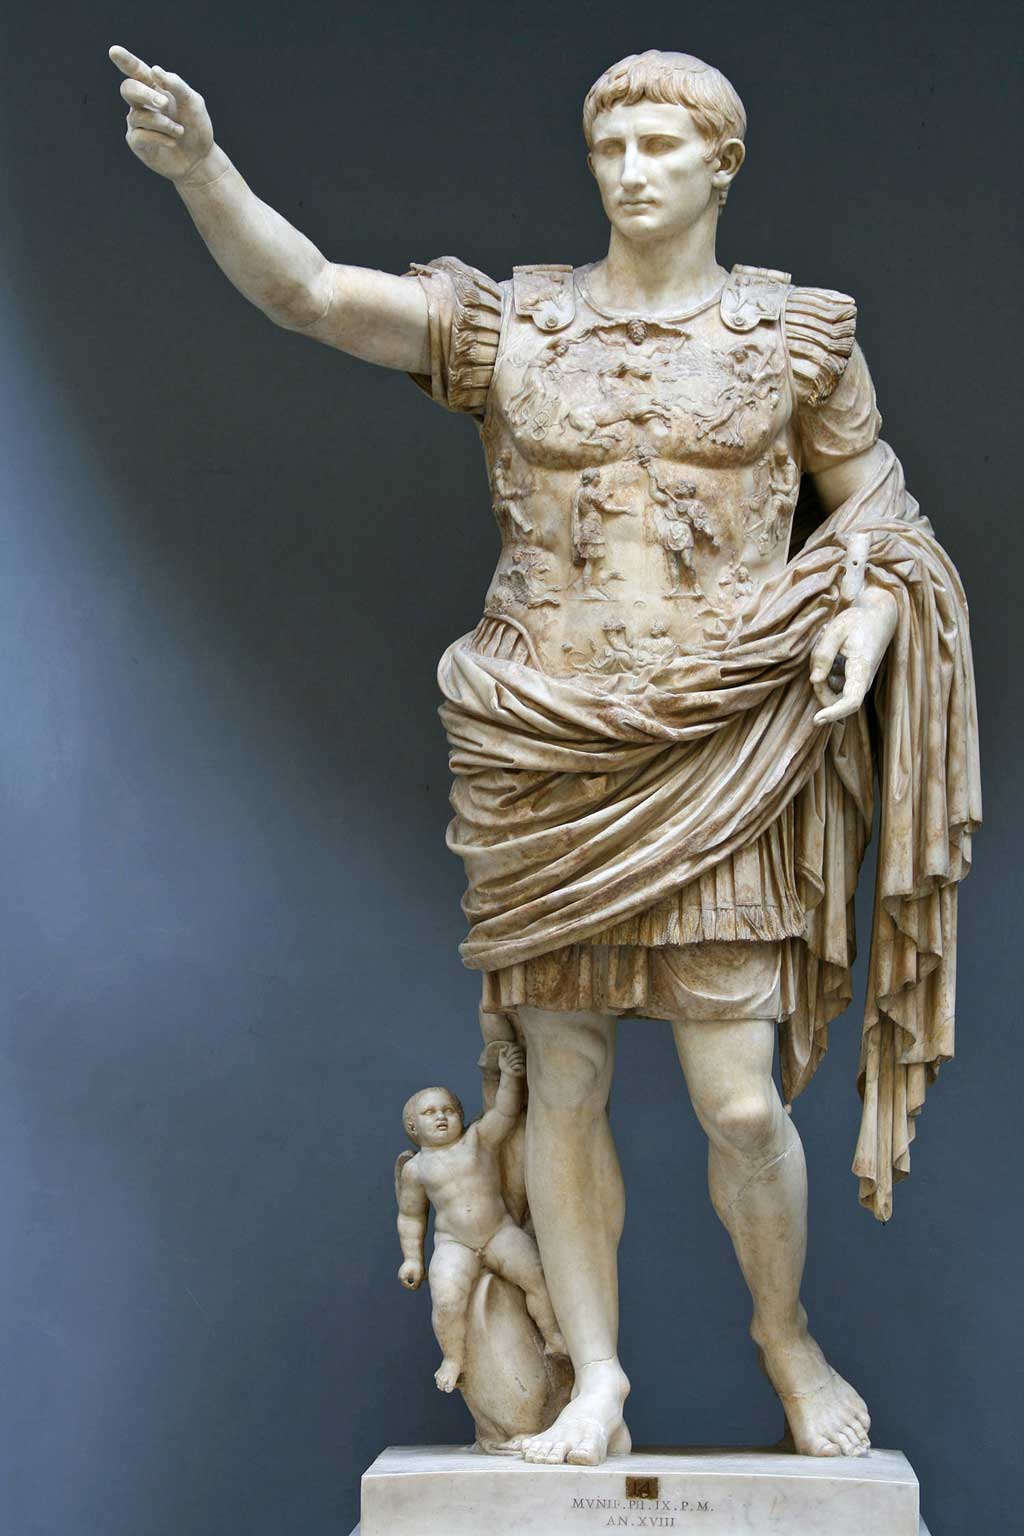 The Augustus of Primaporta statue shows the influence of both Roman and Classical Greek works. Cupid rides a dolphin at Augustus' feet, a symbol of his divine ancestry.